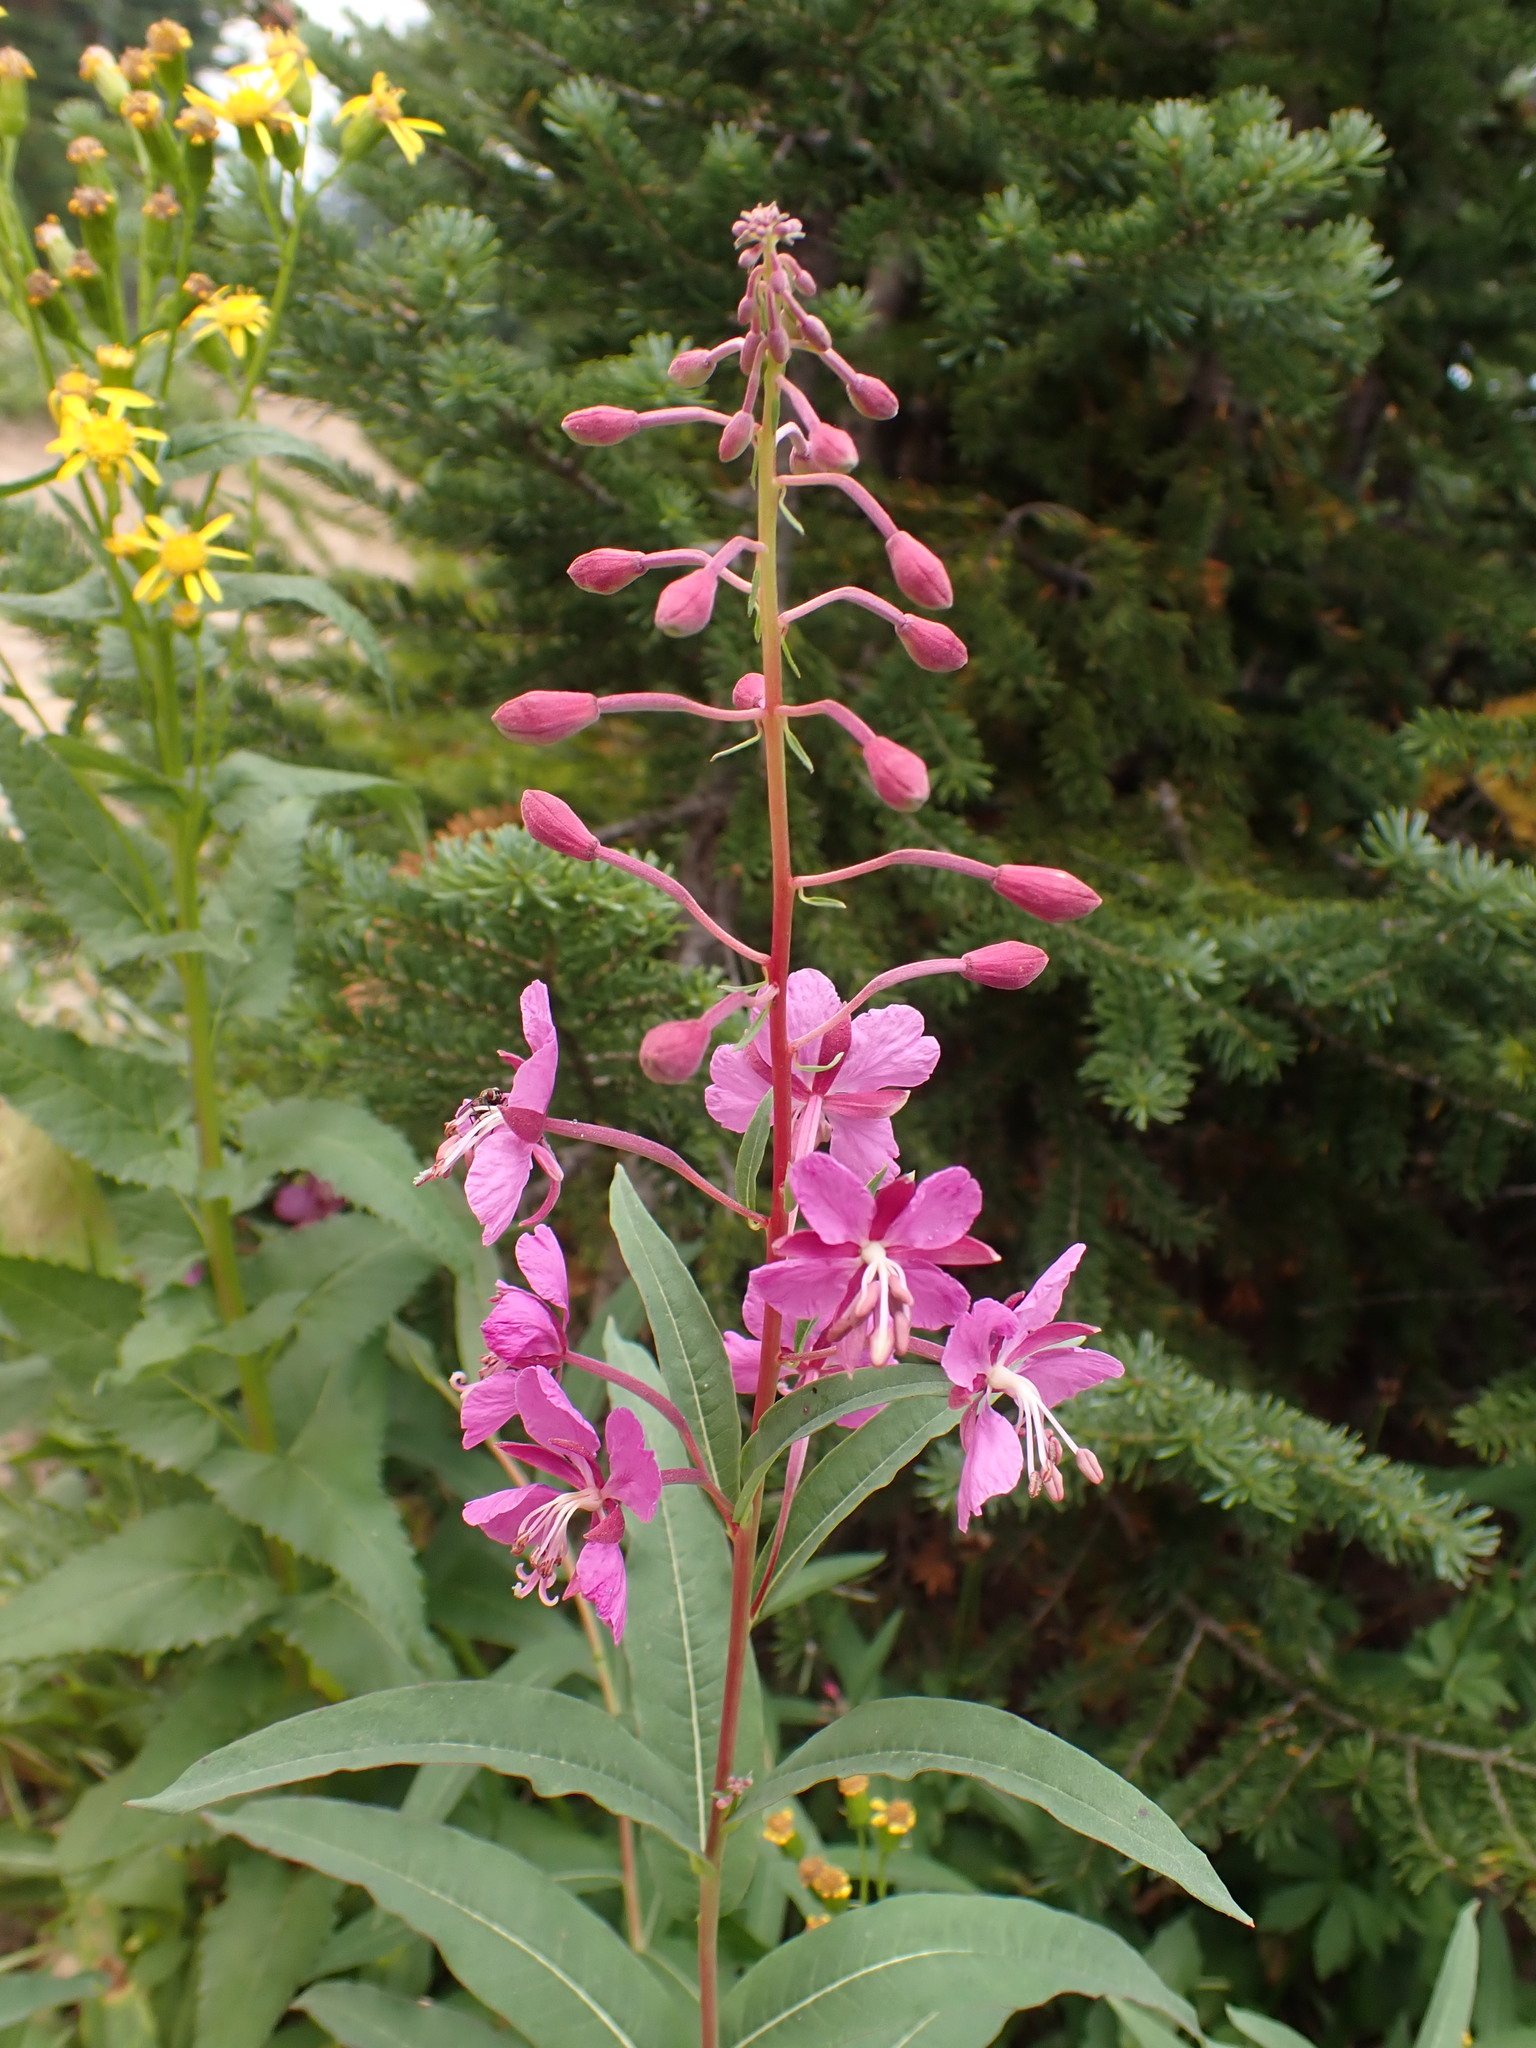 fireweed flowers with the bottom flowers in bloom and the top flowers budding